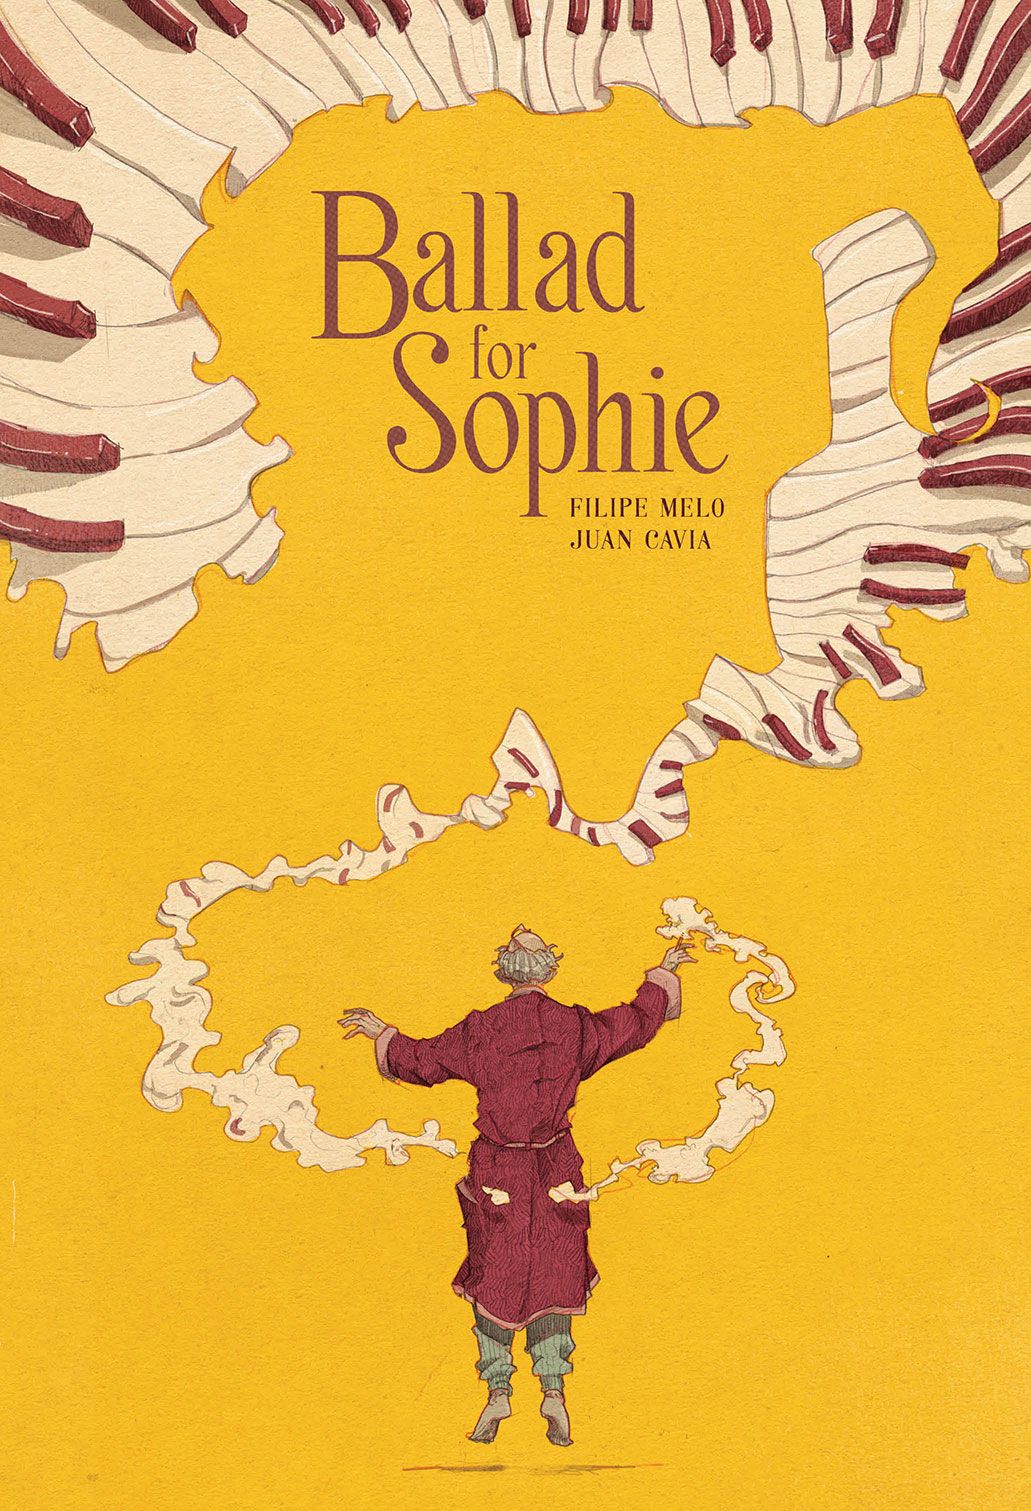 Music and History Come Alive in Ballad for Sophie from IDW (Exclusive)